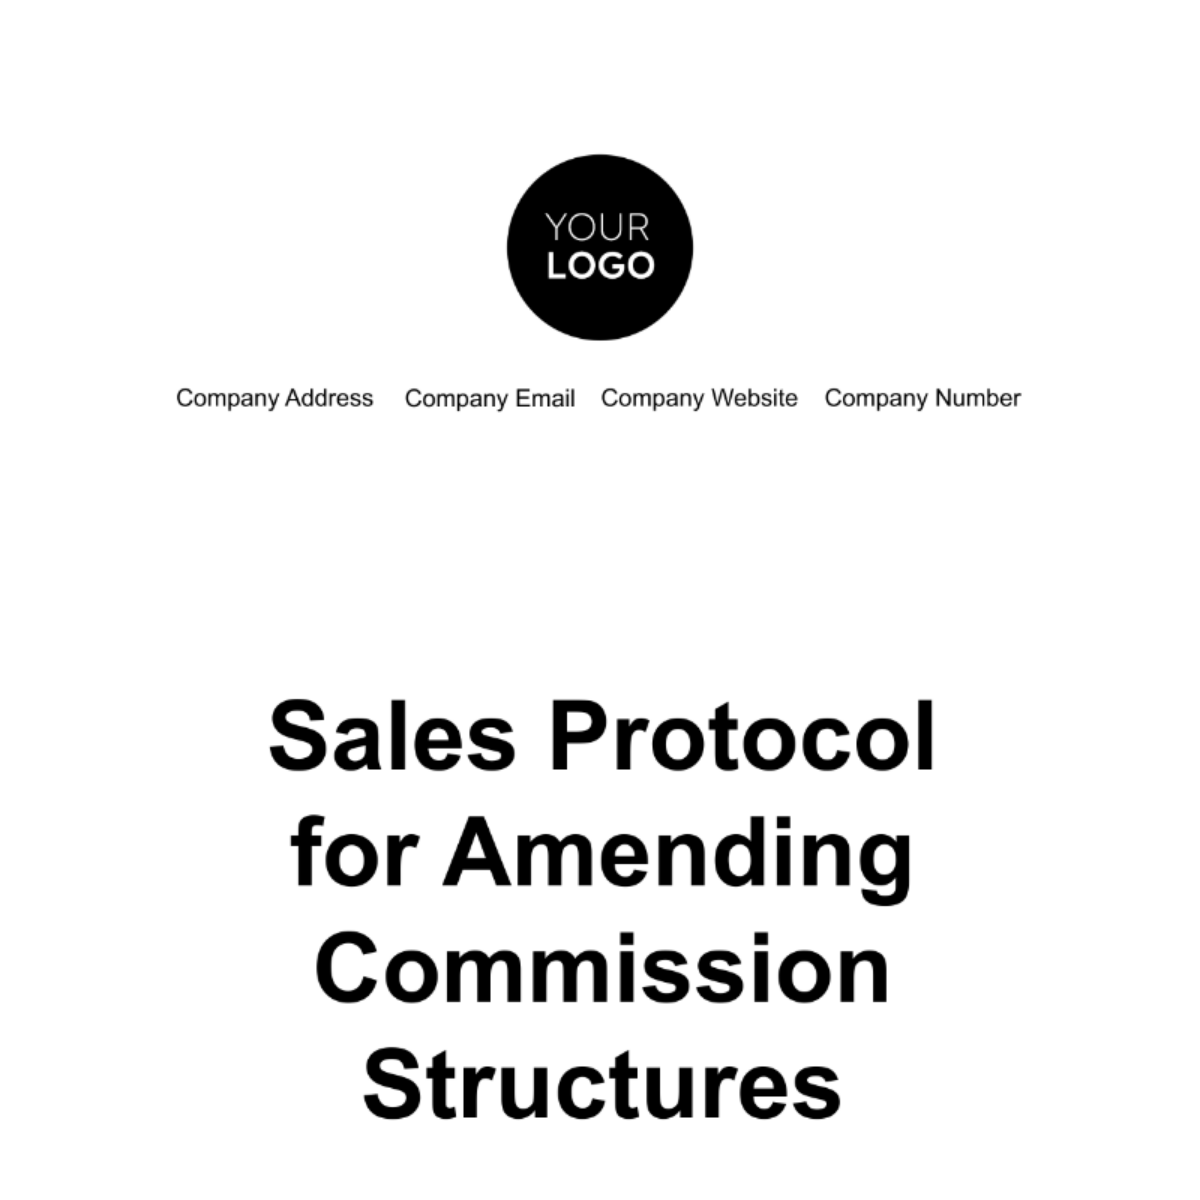 Sales Protocol for Amending Commission Structures Template